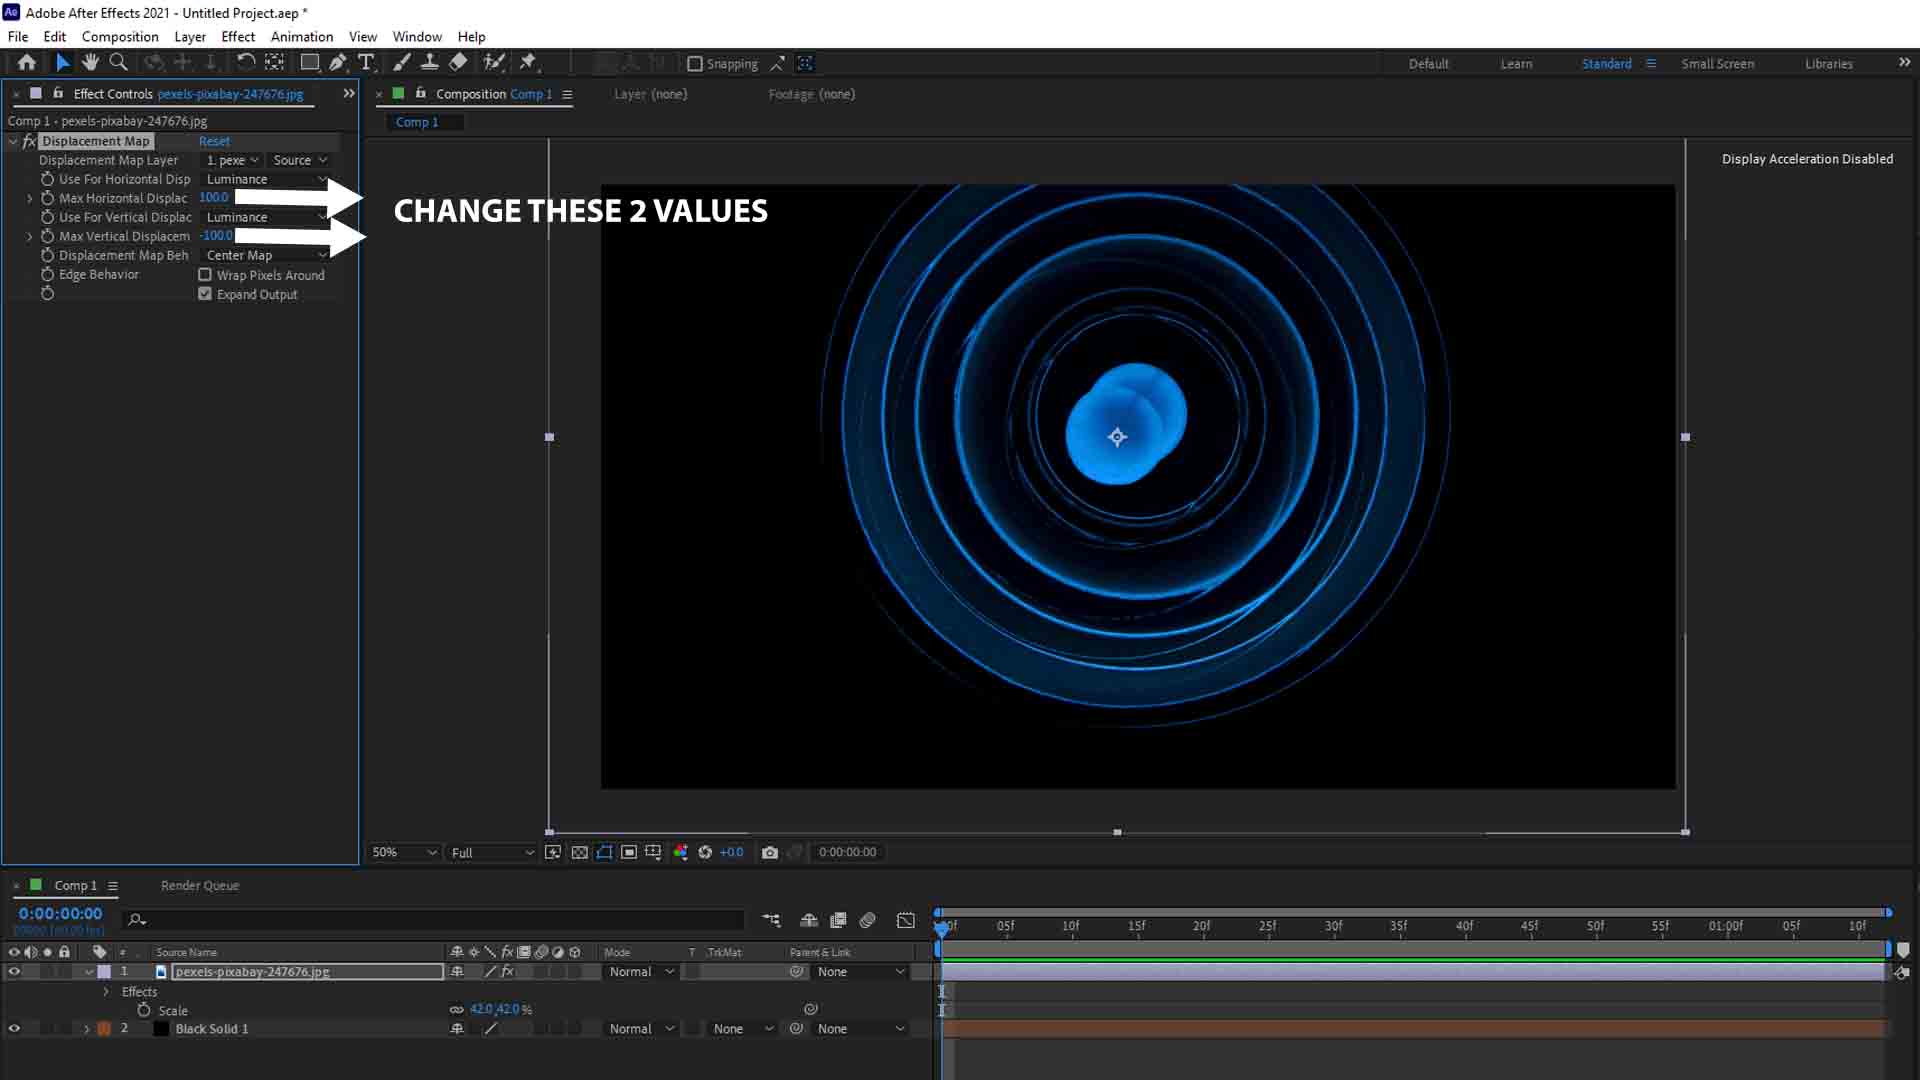 what is Displacement map in Adobe after effects